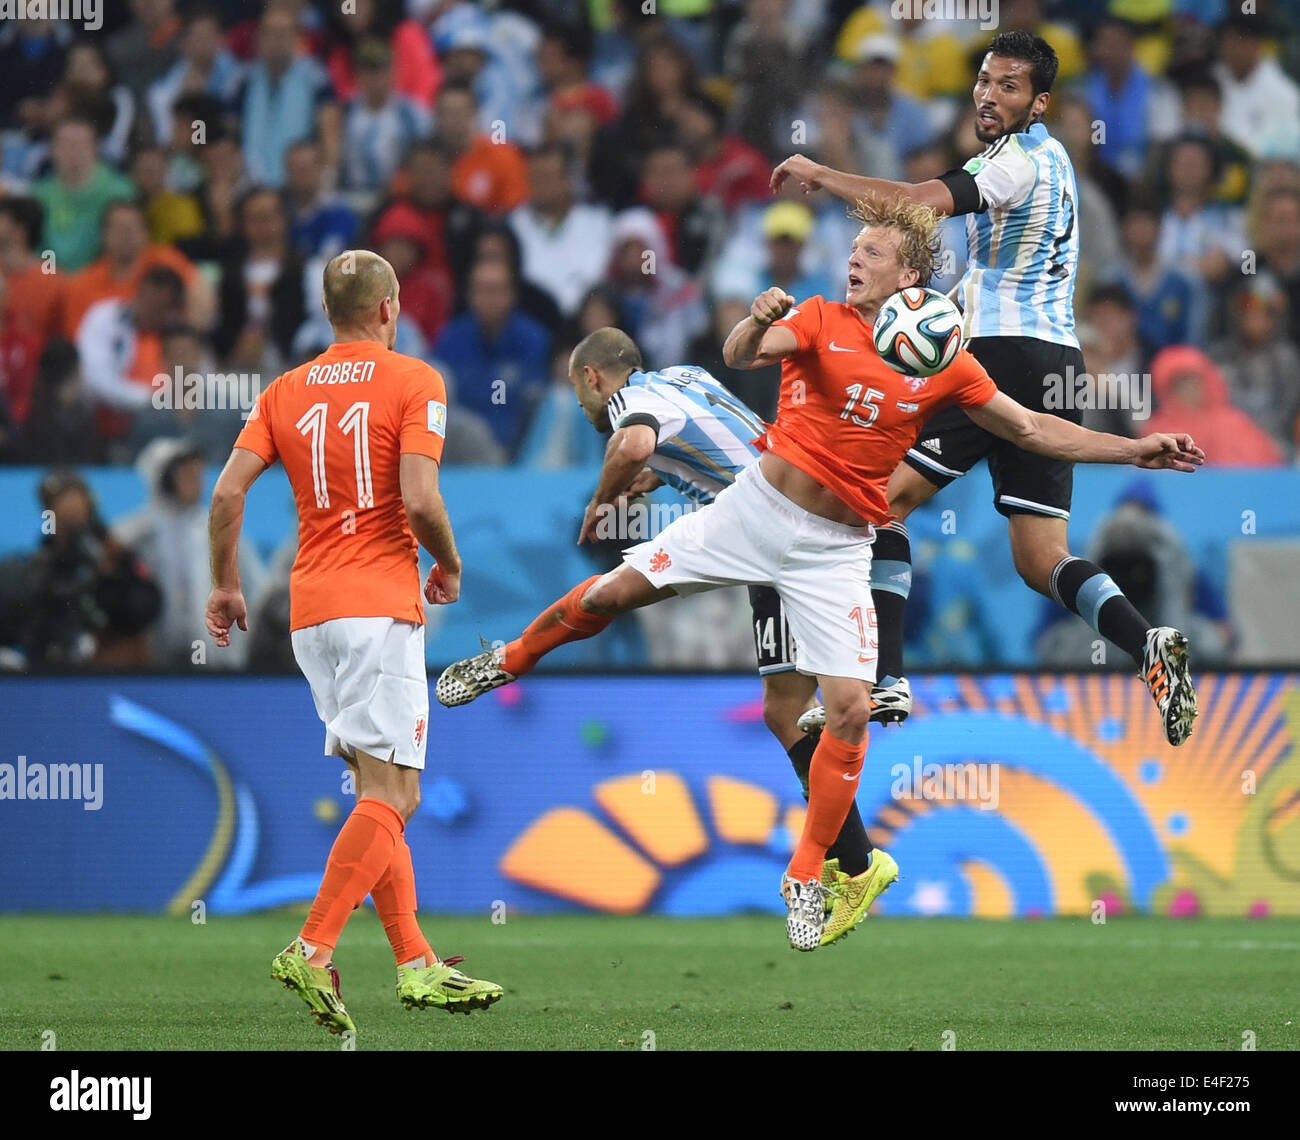 Sao Paulo, Brazil. 09th July, 2014. Javier Mascherano (2-L) and Ezequiel Garay (R) of Argentina and Arjen Robben (L) and Dirk Kuijt (2-R) of the Netherlands vie for the ball during the FIFA World Cup 2014 semi-final soccer match between the Netherlands and Argentina at the Arena Corinthians in Sao Paulo, Brazil, 09 July 2014. Photo: Marius Becker/dpa/Alamy Live News Stock Photo